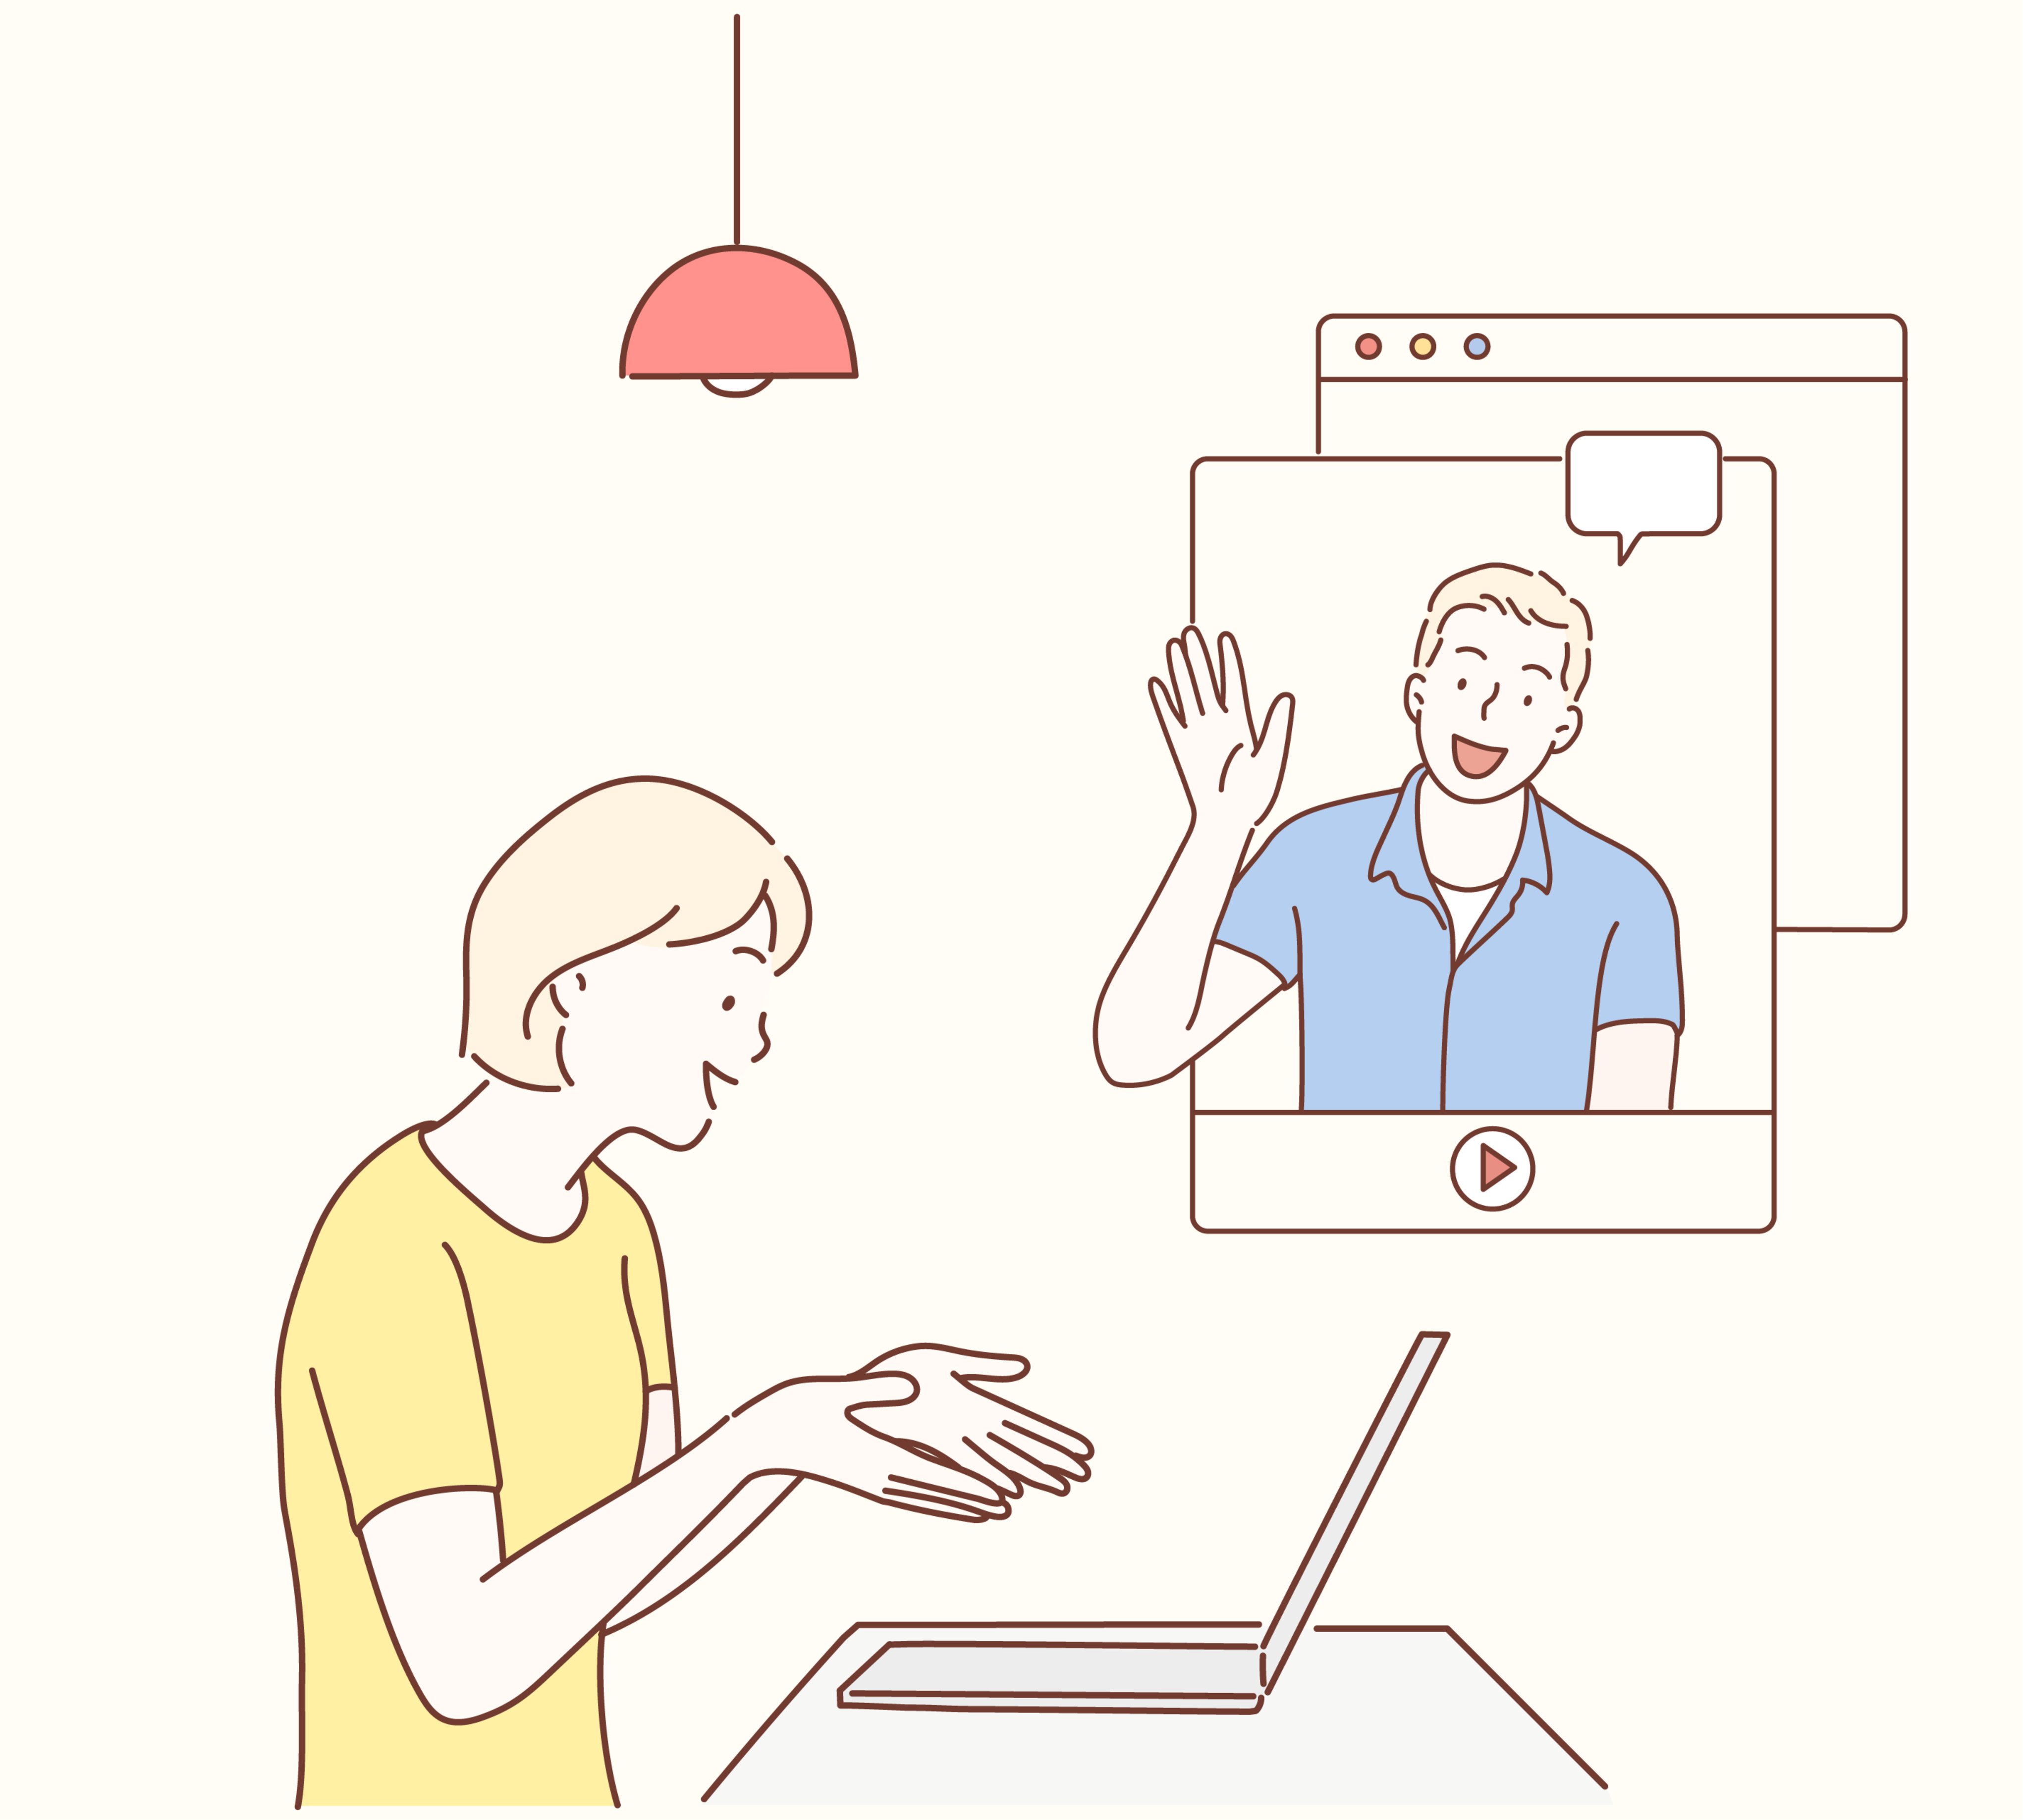 Hand drawn style vector design illustration of laptop screen and two people talking by internet.